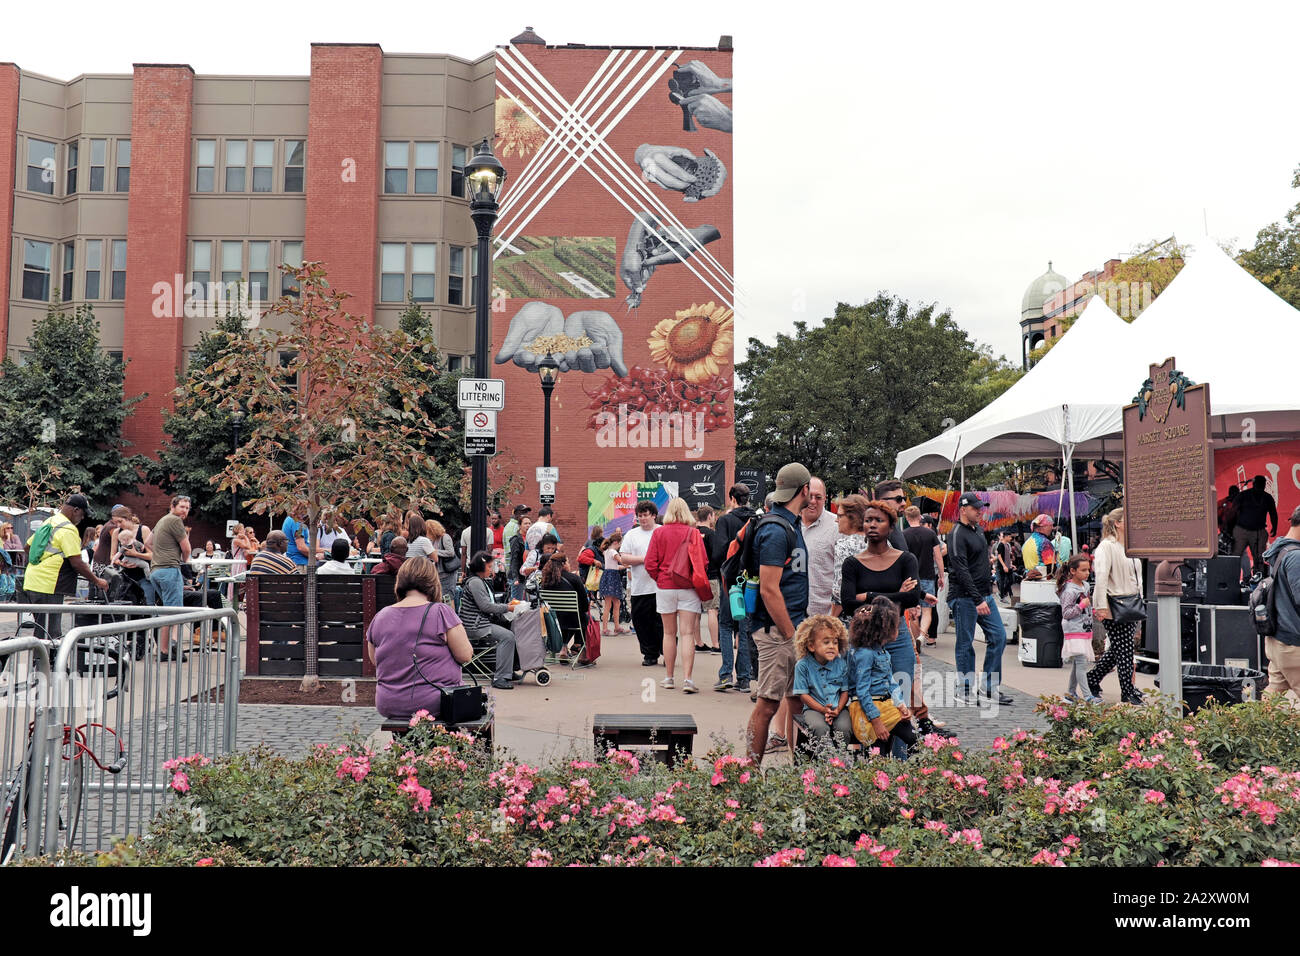 2019 Ohio City Street Festival in the trendy gentrifying neighborhood near downtown Cleveland, Ohio occurs in late September. Stock Photo